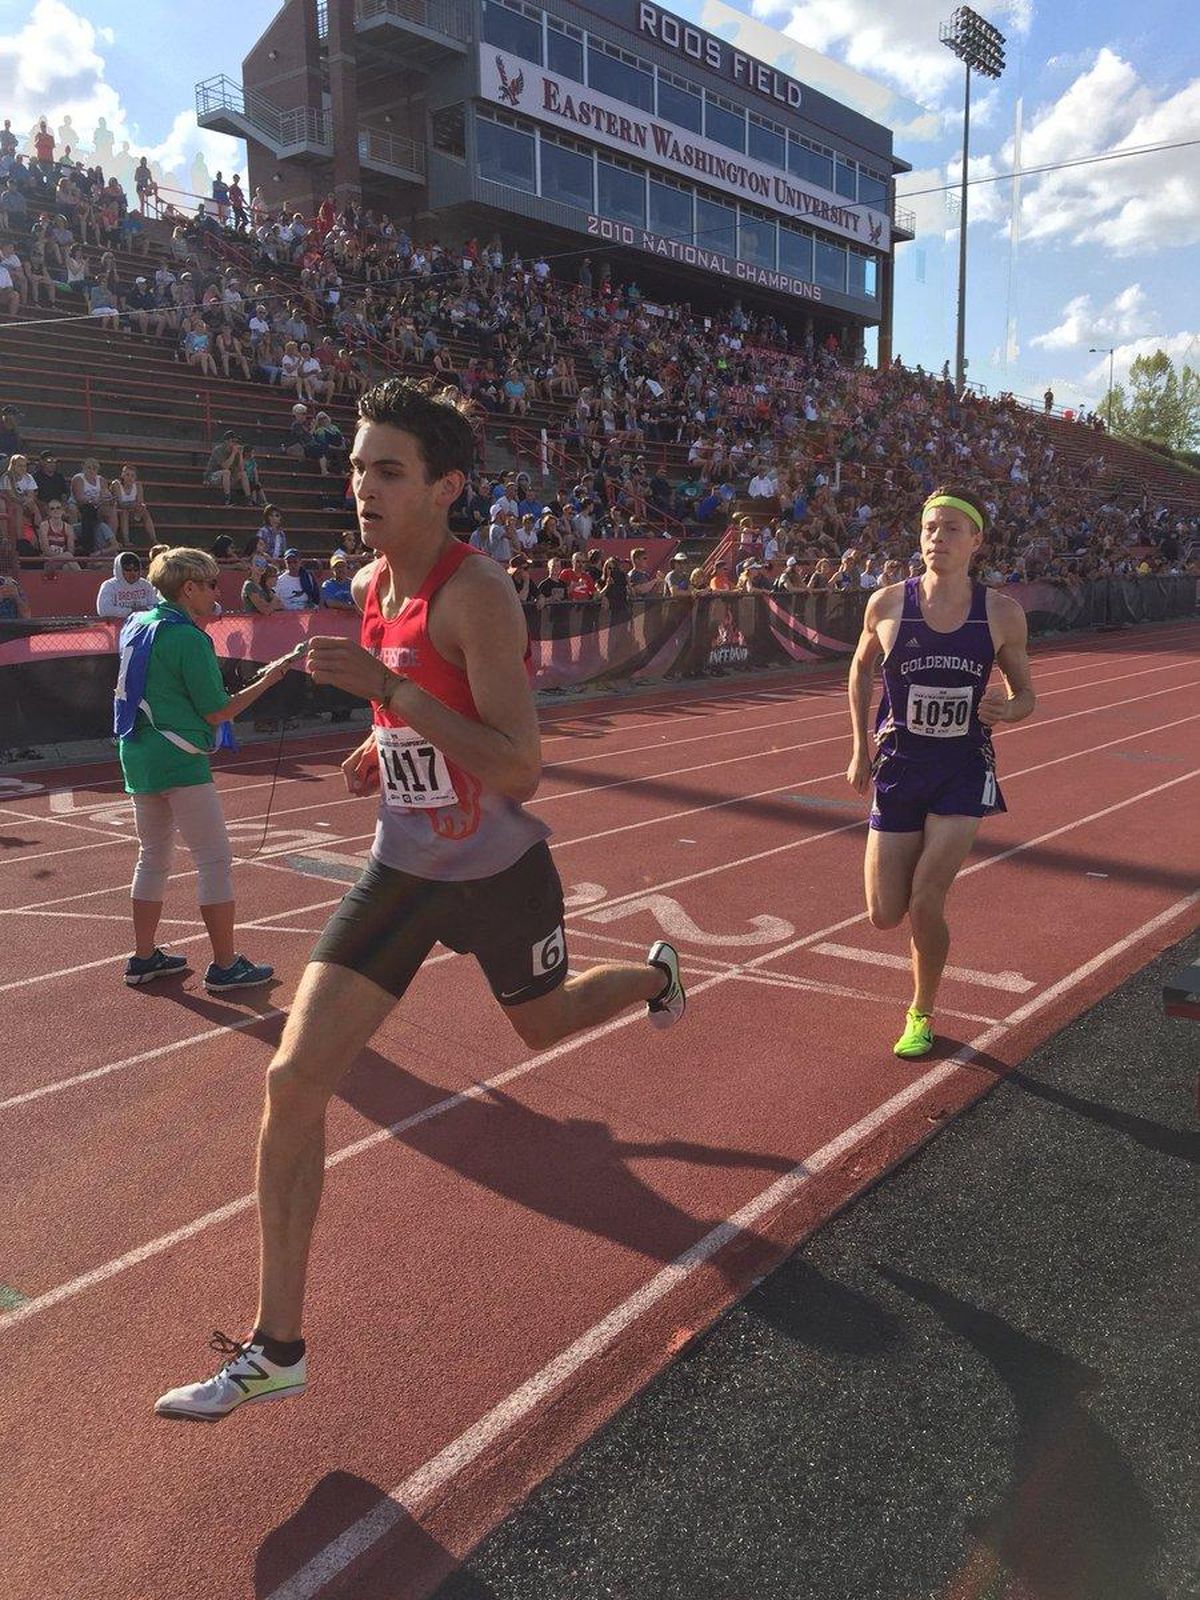 Riverside senior Ben Shaw won the 1A boys 1,600-meter run at the Washington State 1A/2B/1B track and field championships at Roos Field in Cheney on Thursday. (@wiaawa / Twitter)